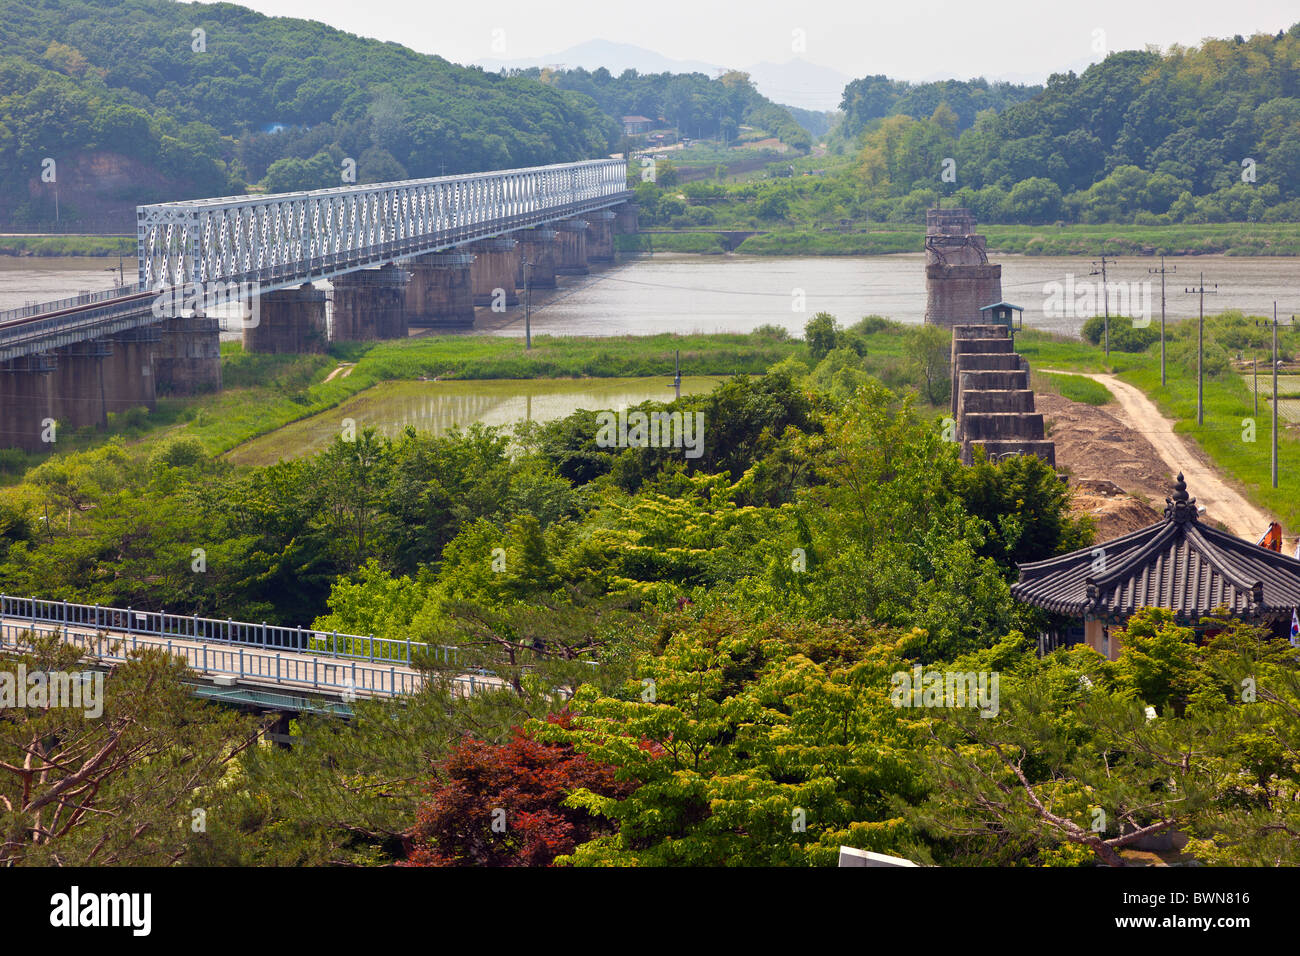 Old and new Freedom railway bridges over Imjin River between North and South Korea, DMZ Demilitarized Zone, South Korea. JMH3829 Stock Photo